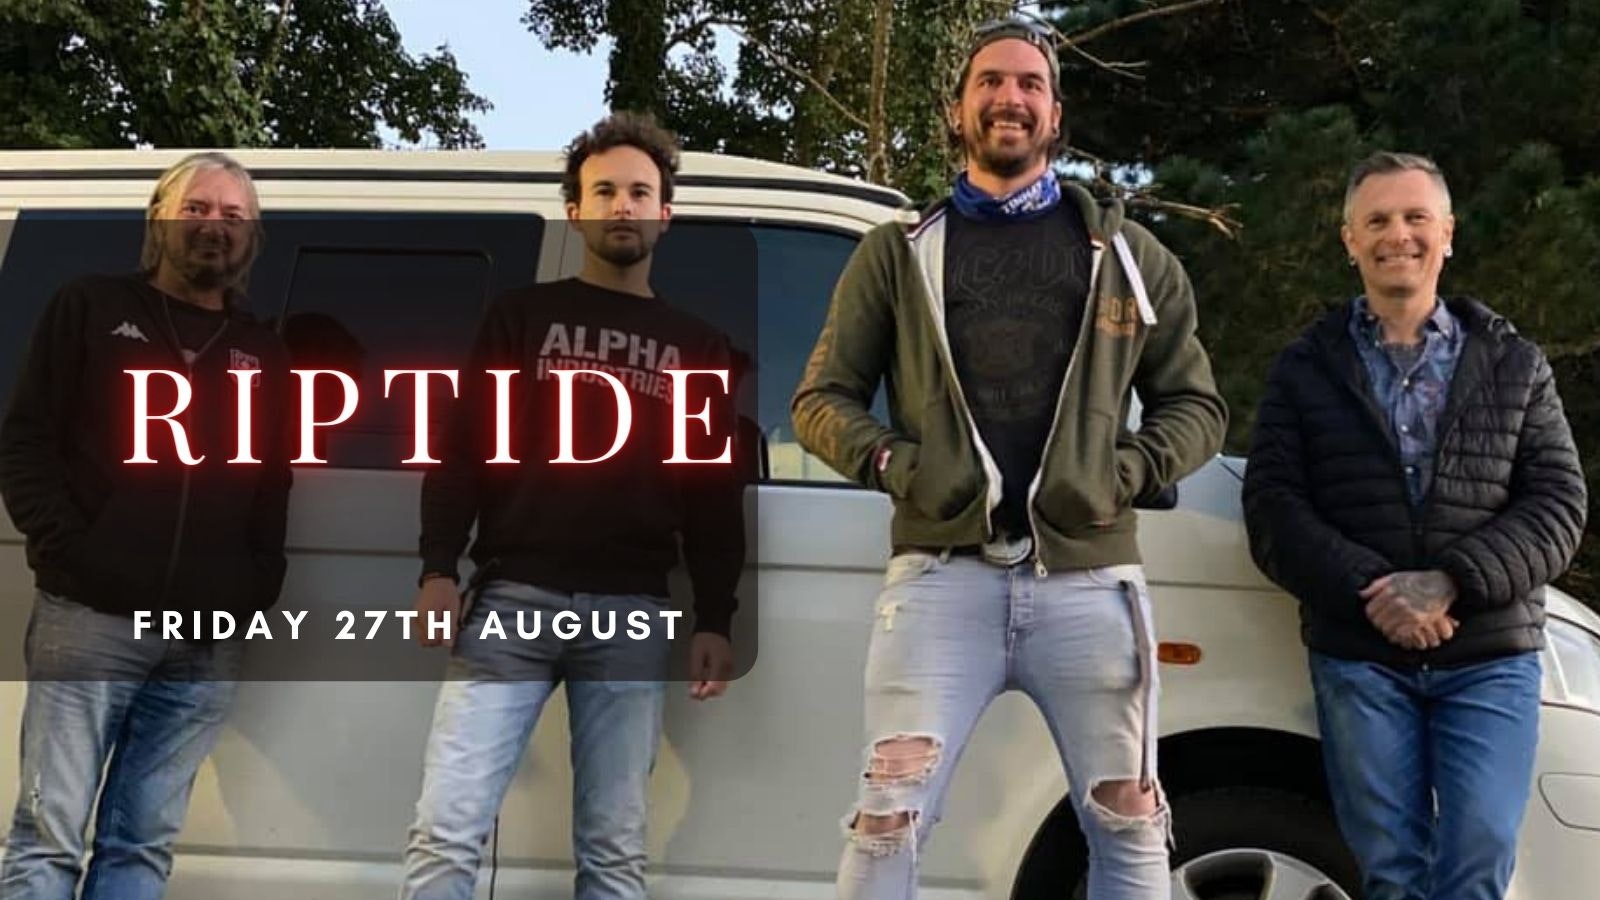 RIPTIDE | Plymouth, Annabel’s Cabaret & Discotheque